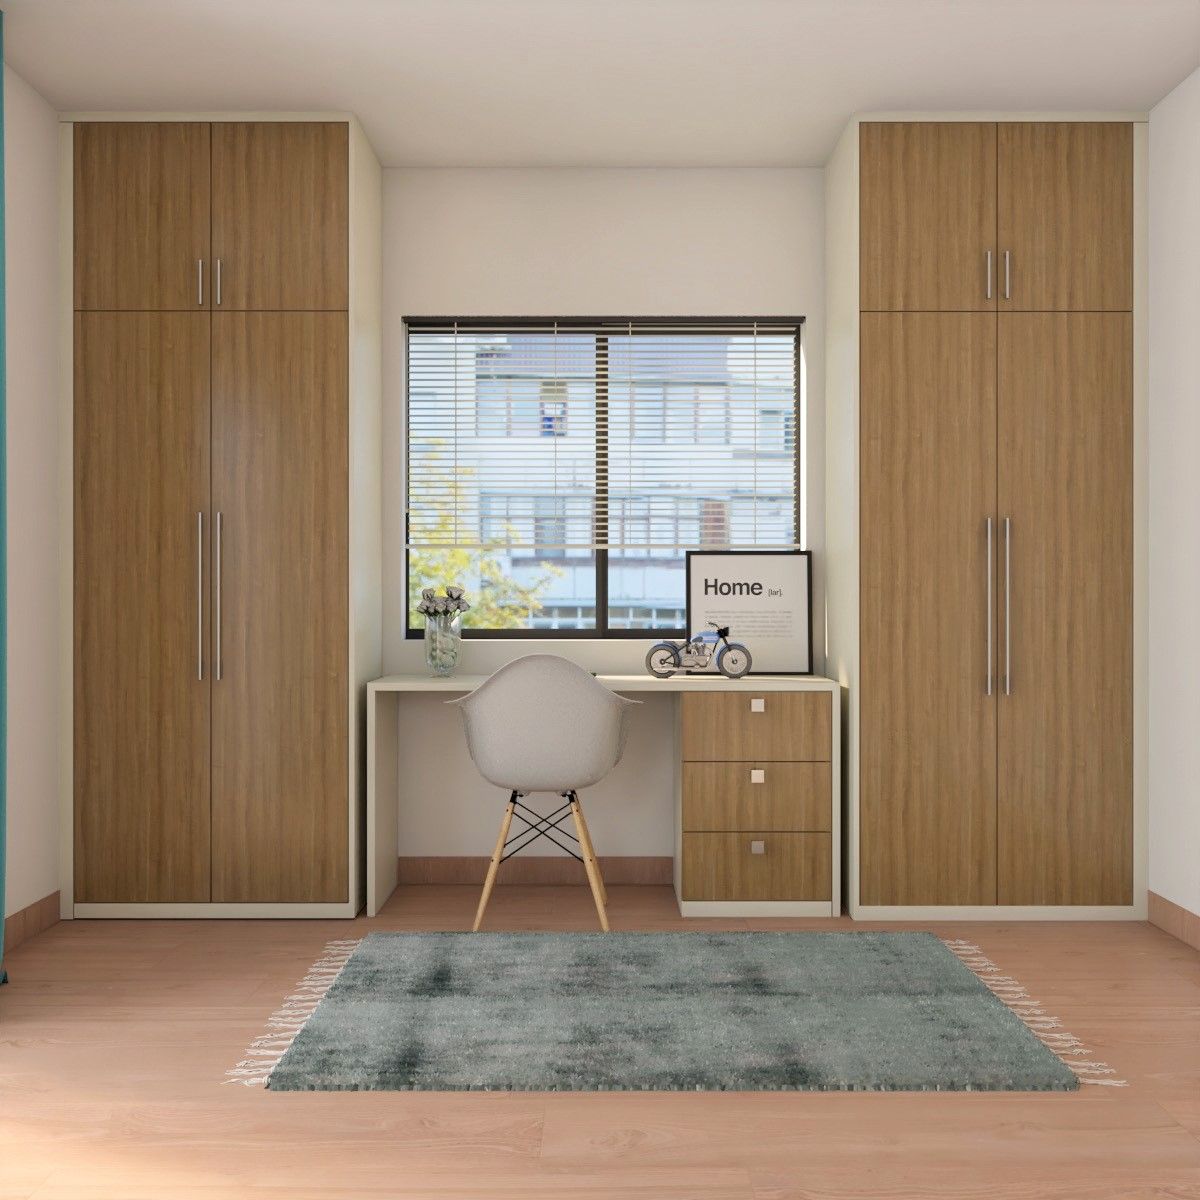 Aesthetic Home Office Design with Identical Wooden Wardrobes